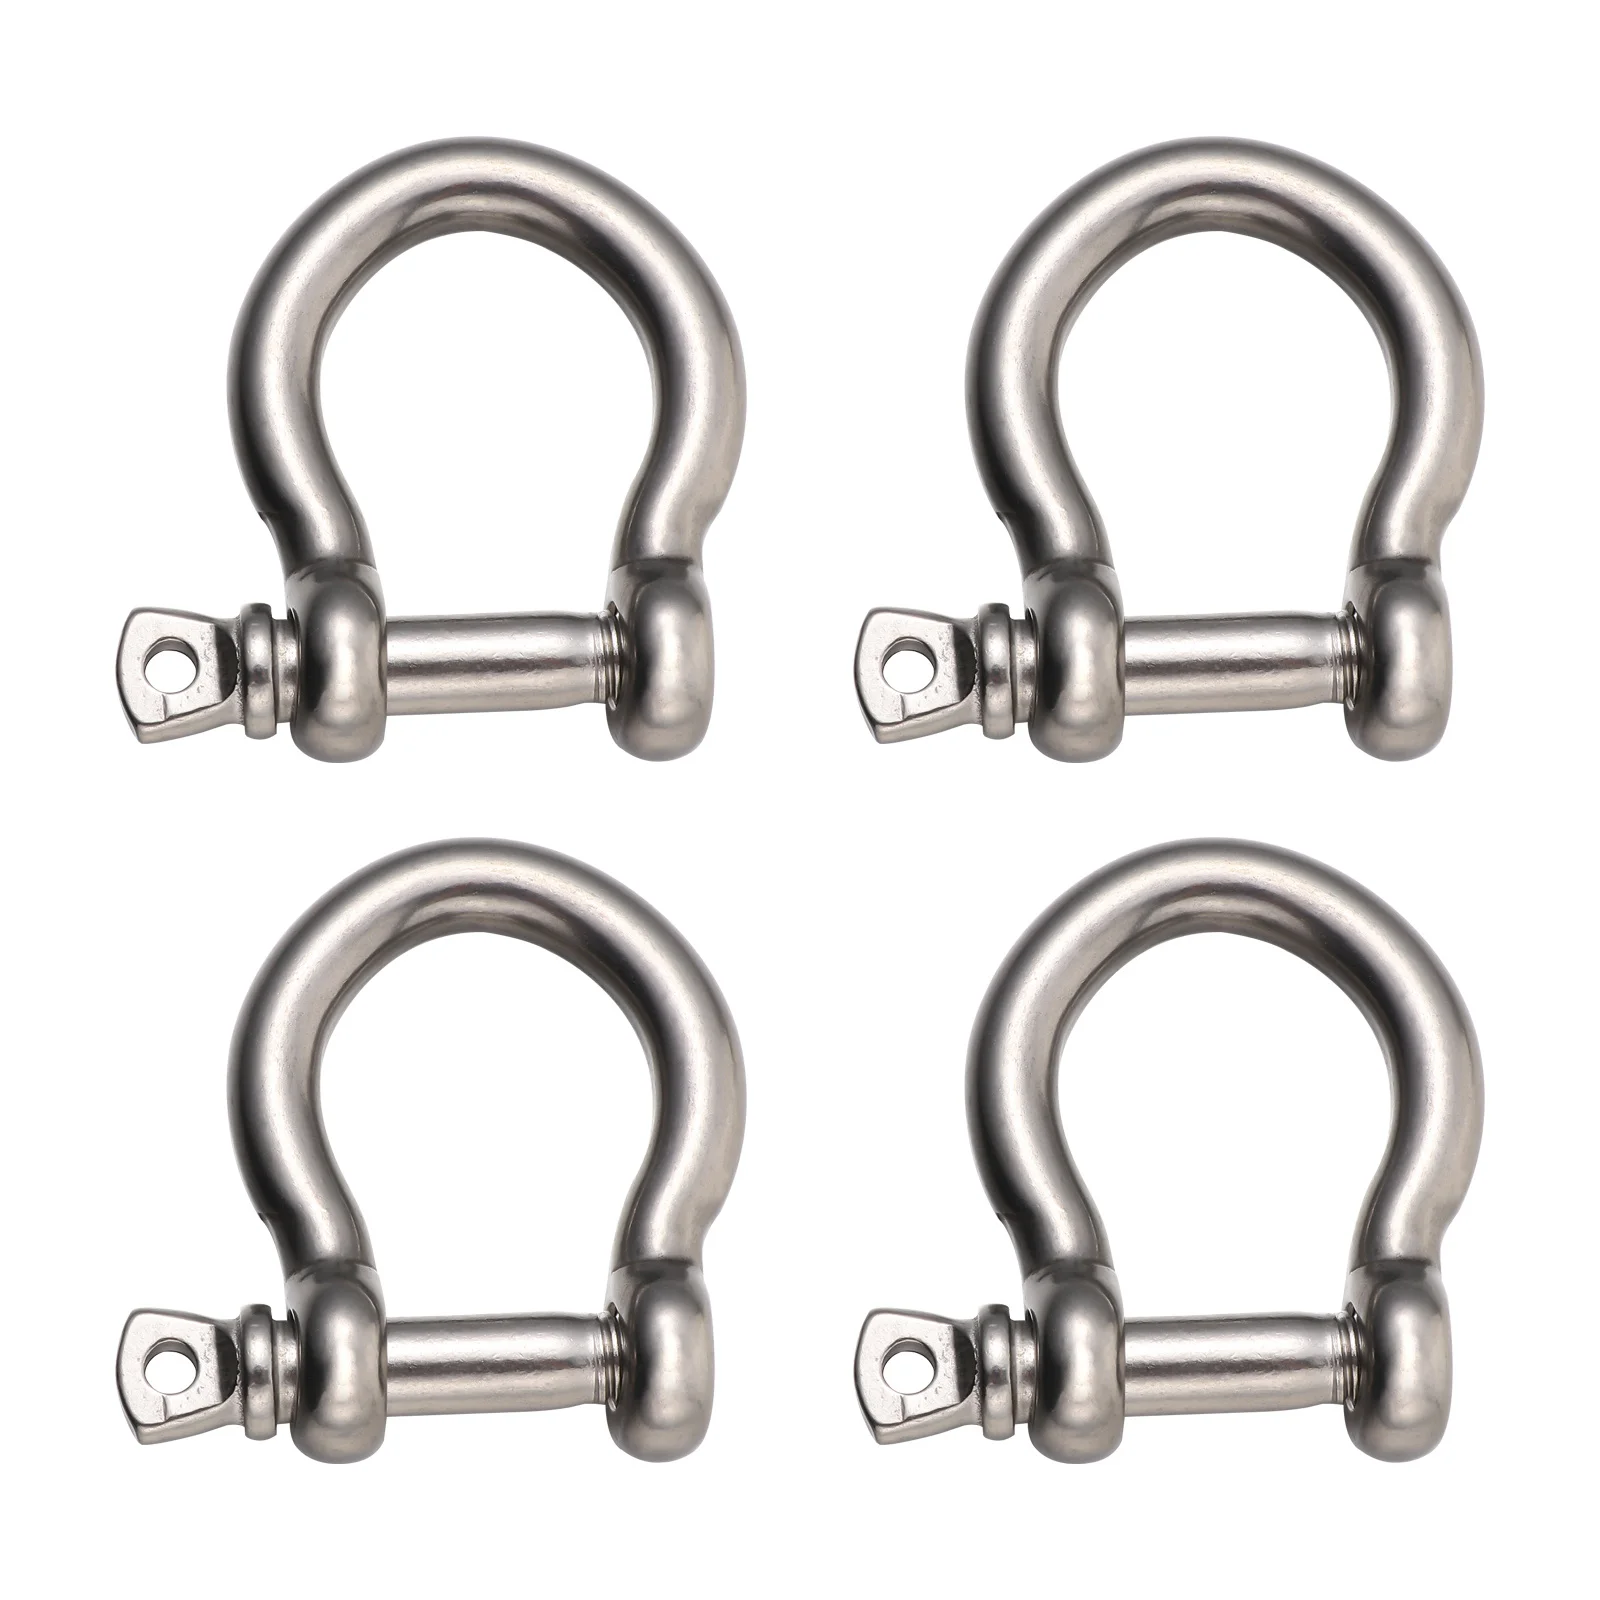 

Bow Buckle Metal Shackle Lock Durable Shackles Sturdy Stainless Steel Horseshoe Shape Design Lifting Shaped Hose